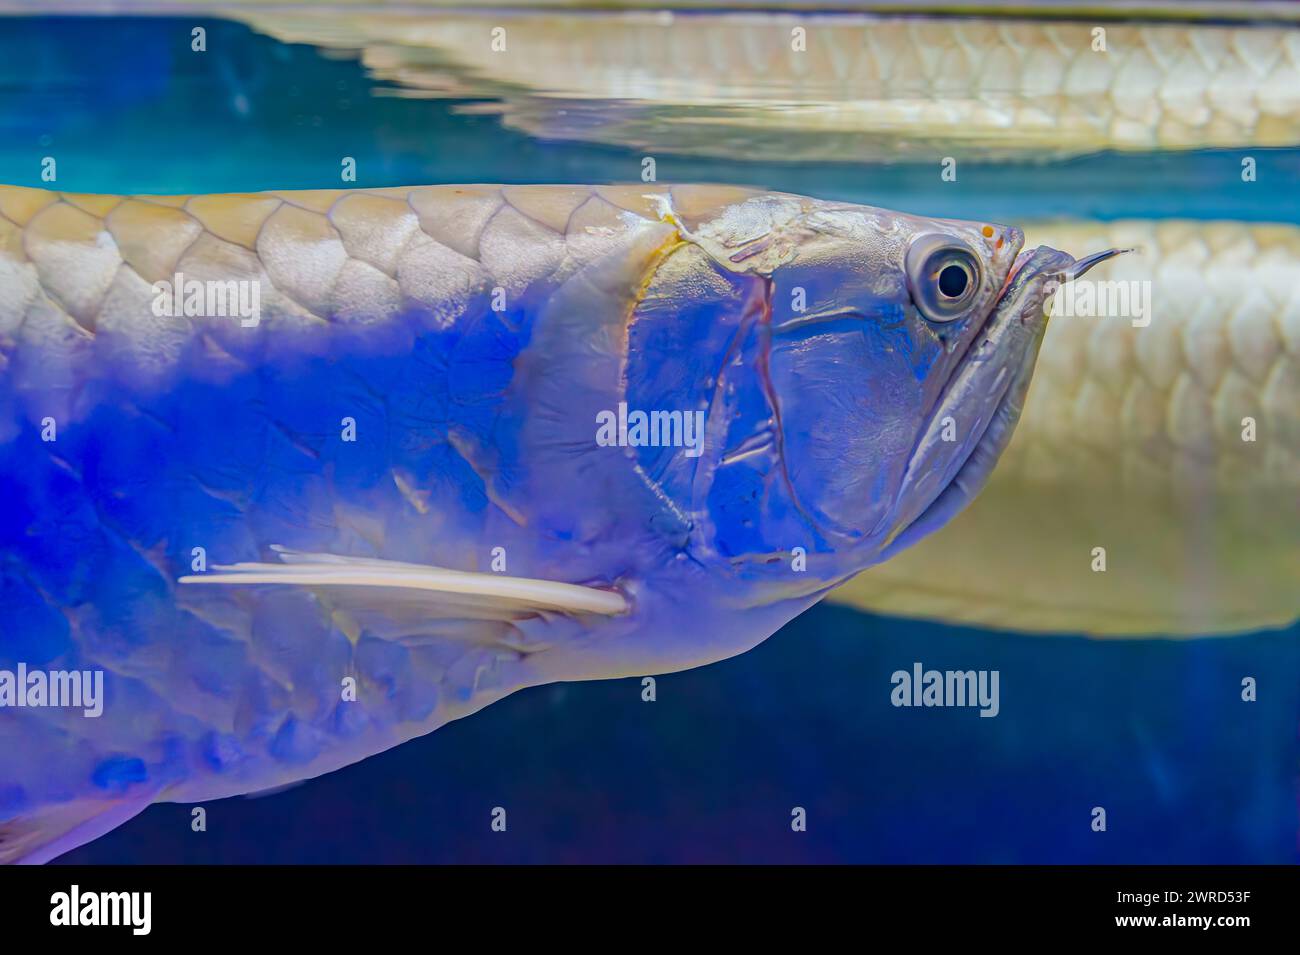 close-up of a silver arowana fish. The fish has a long, slender body with large scales and a shimmery silver color. Asian gold arowana fish face close Stock Photo